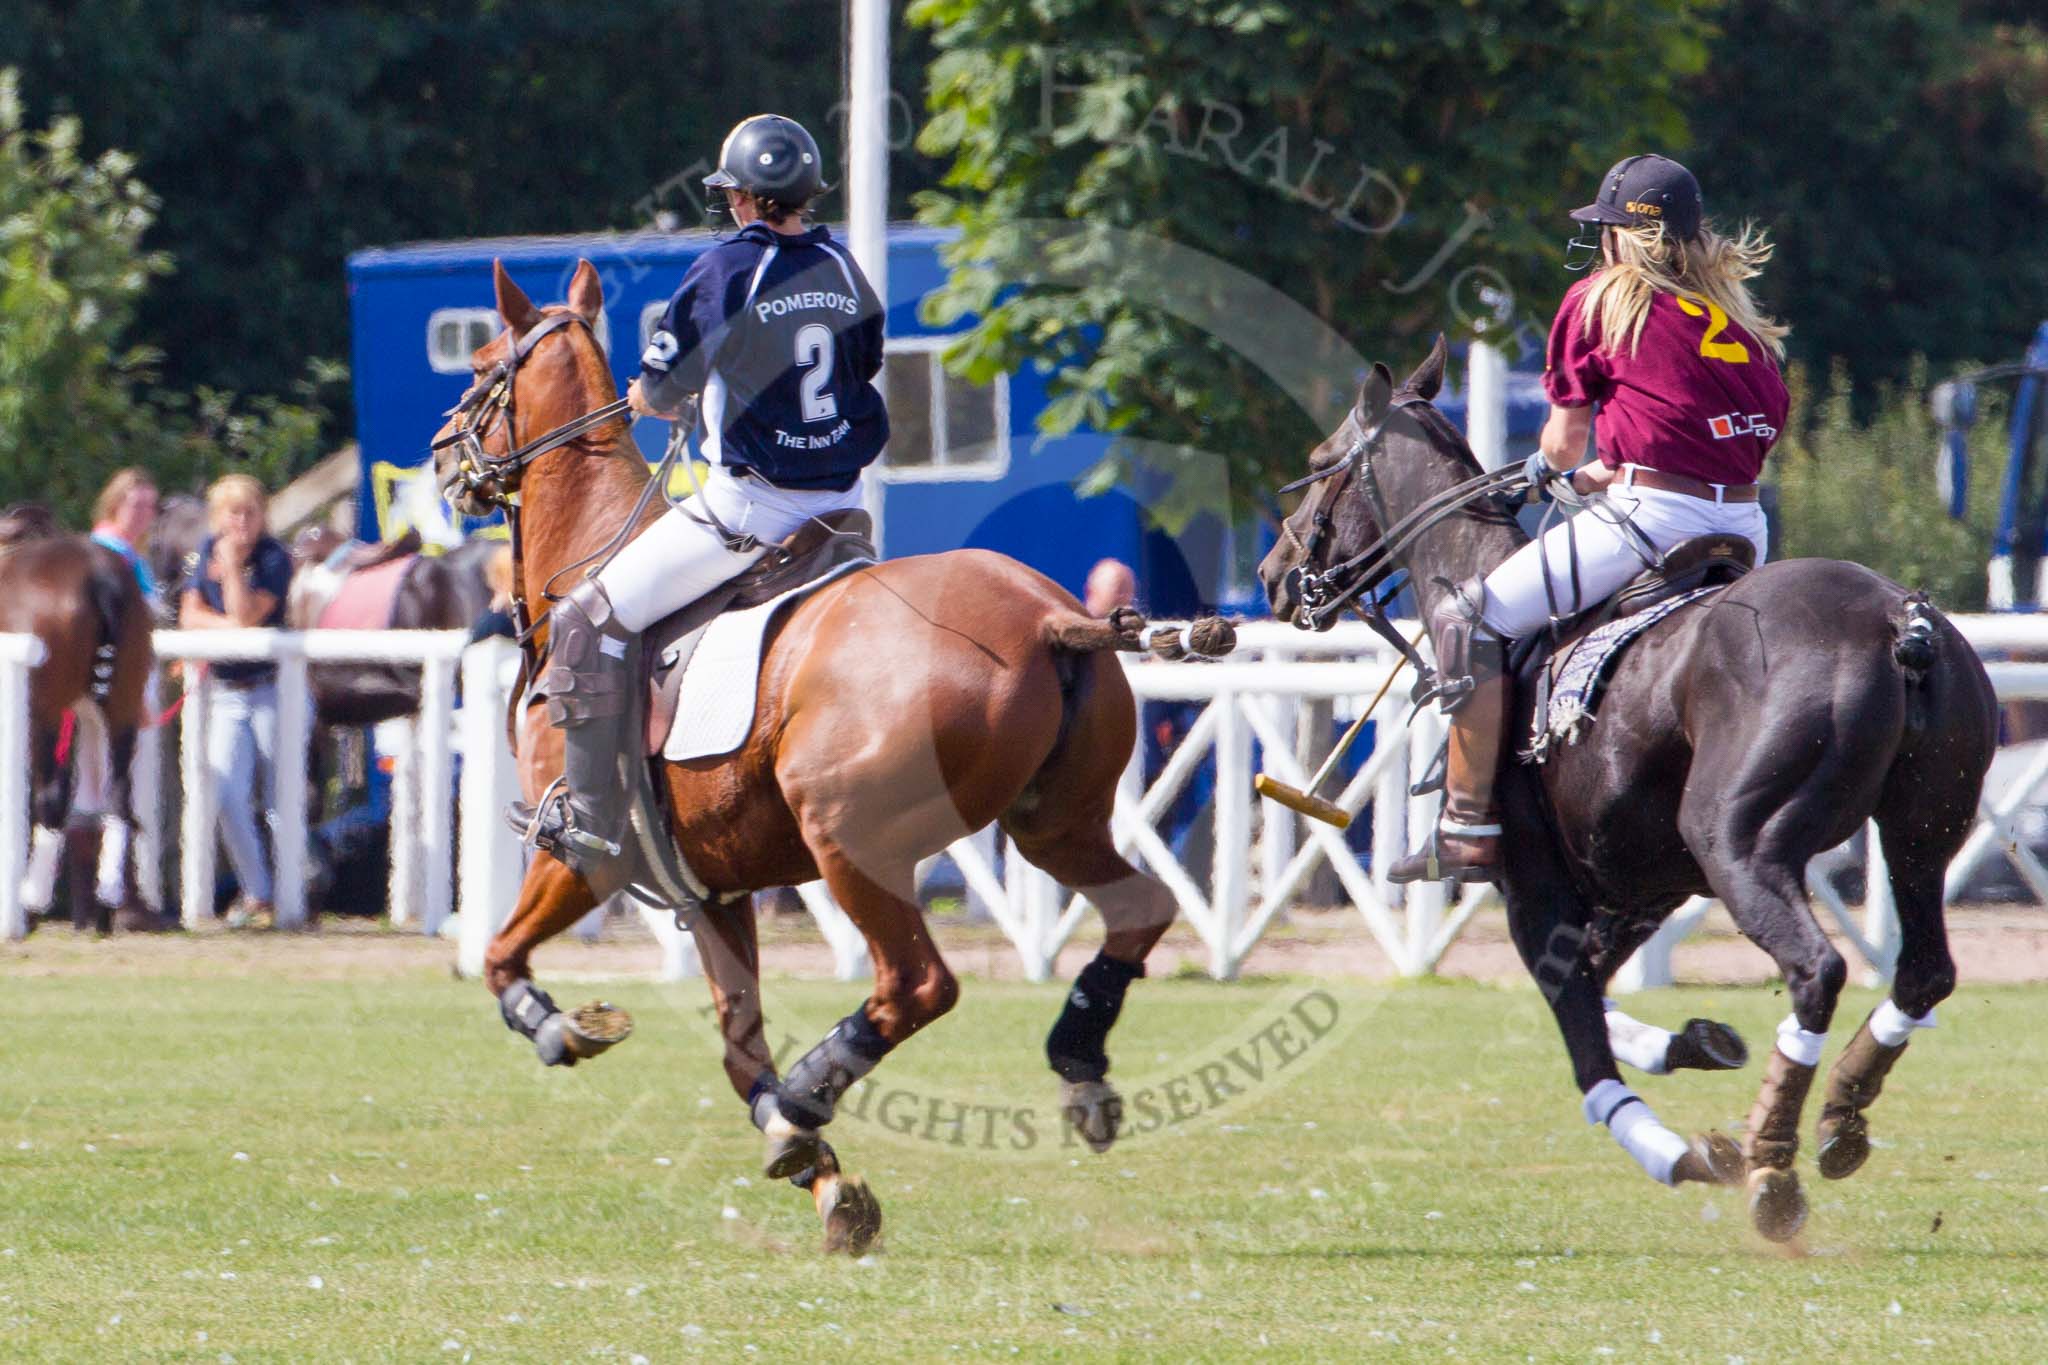 DBPC Polo in the Park 2013, Final of the Amaranther Trophy (0 Goal), Bucking Broncos vs The Inn Team.
Dallas Burston Polo Club, ,
Southam,
Warwickshire,
United Kingdom,
on 01 September 2013 at 11:36, image #118